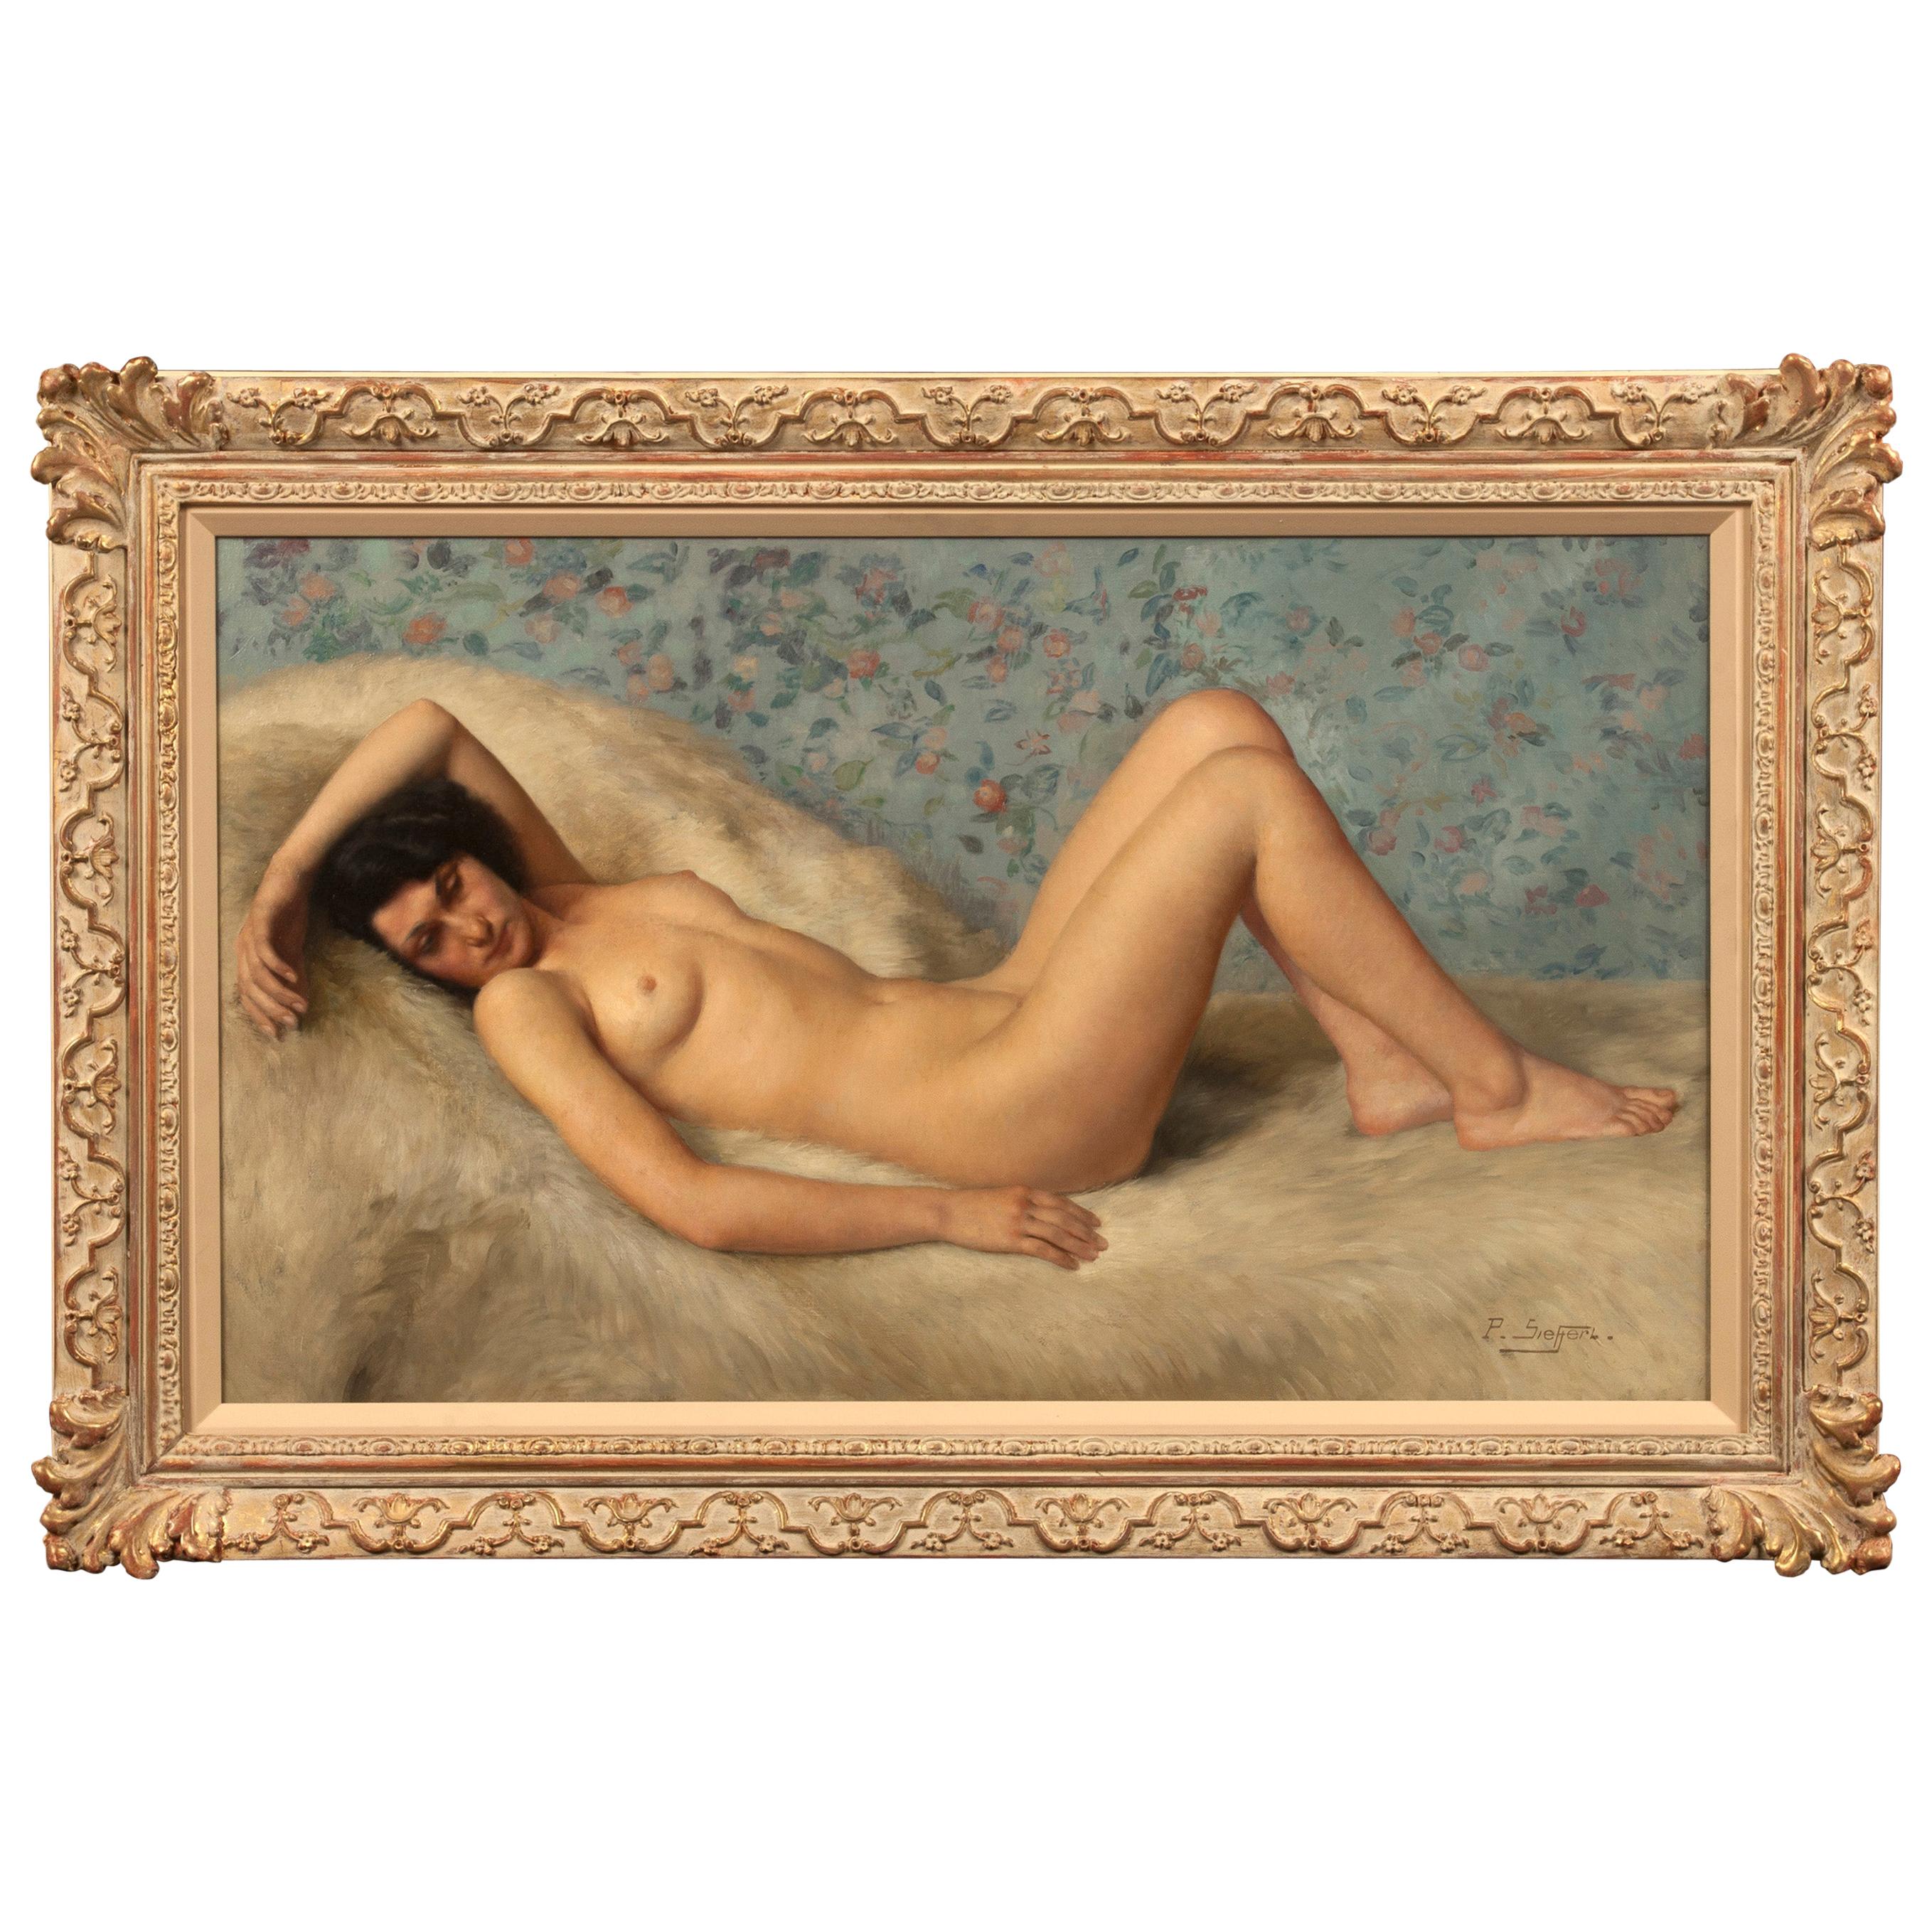 Painting of a Reclining Female Nude by Paul Sieffert 'French', Oil on Canvas